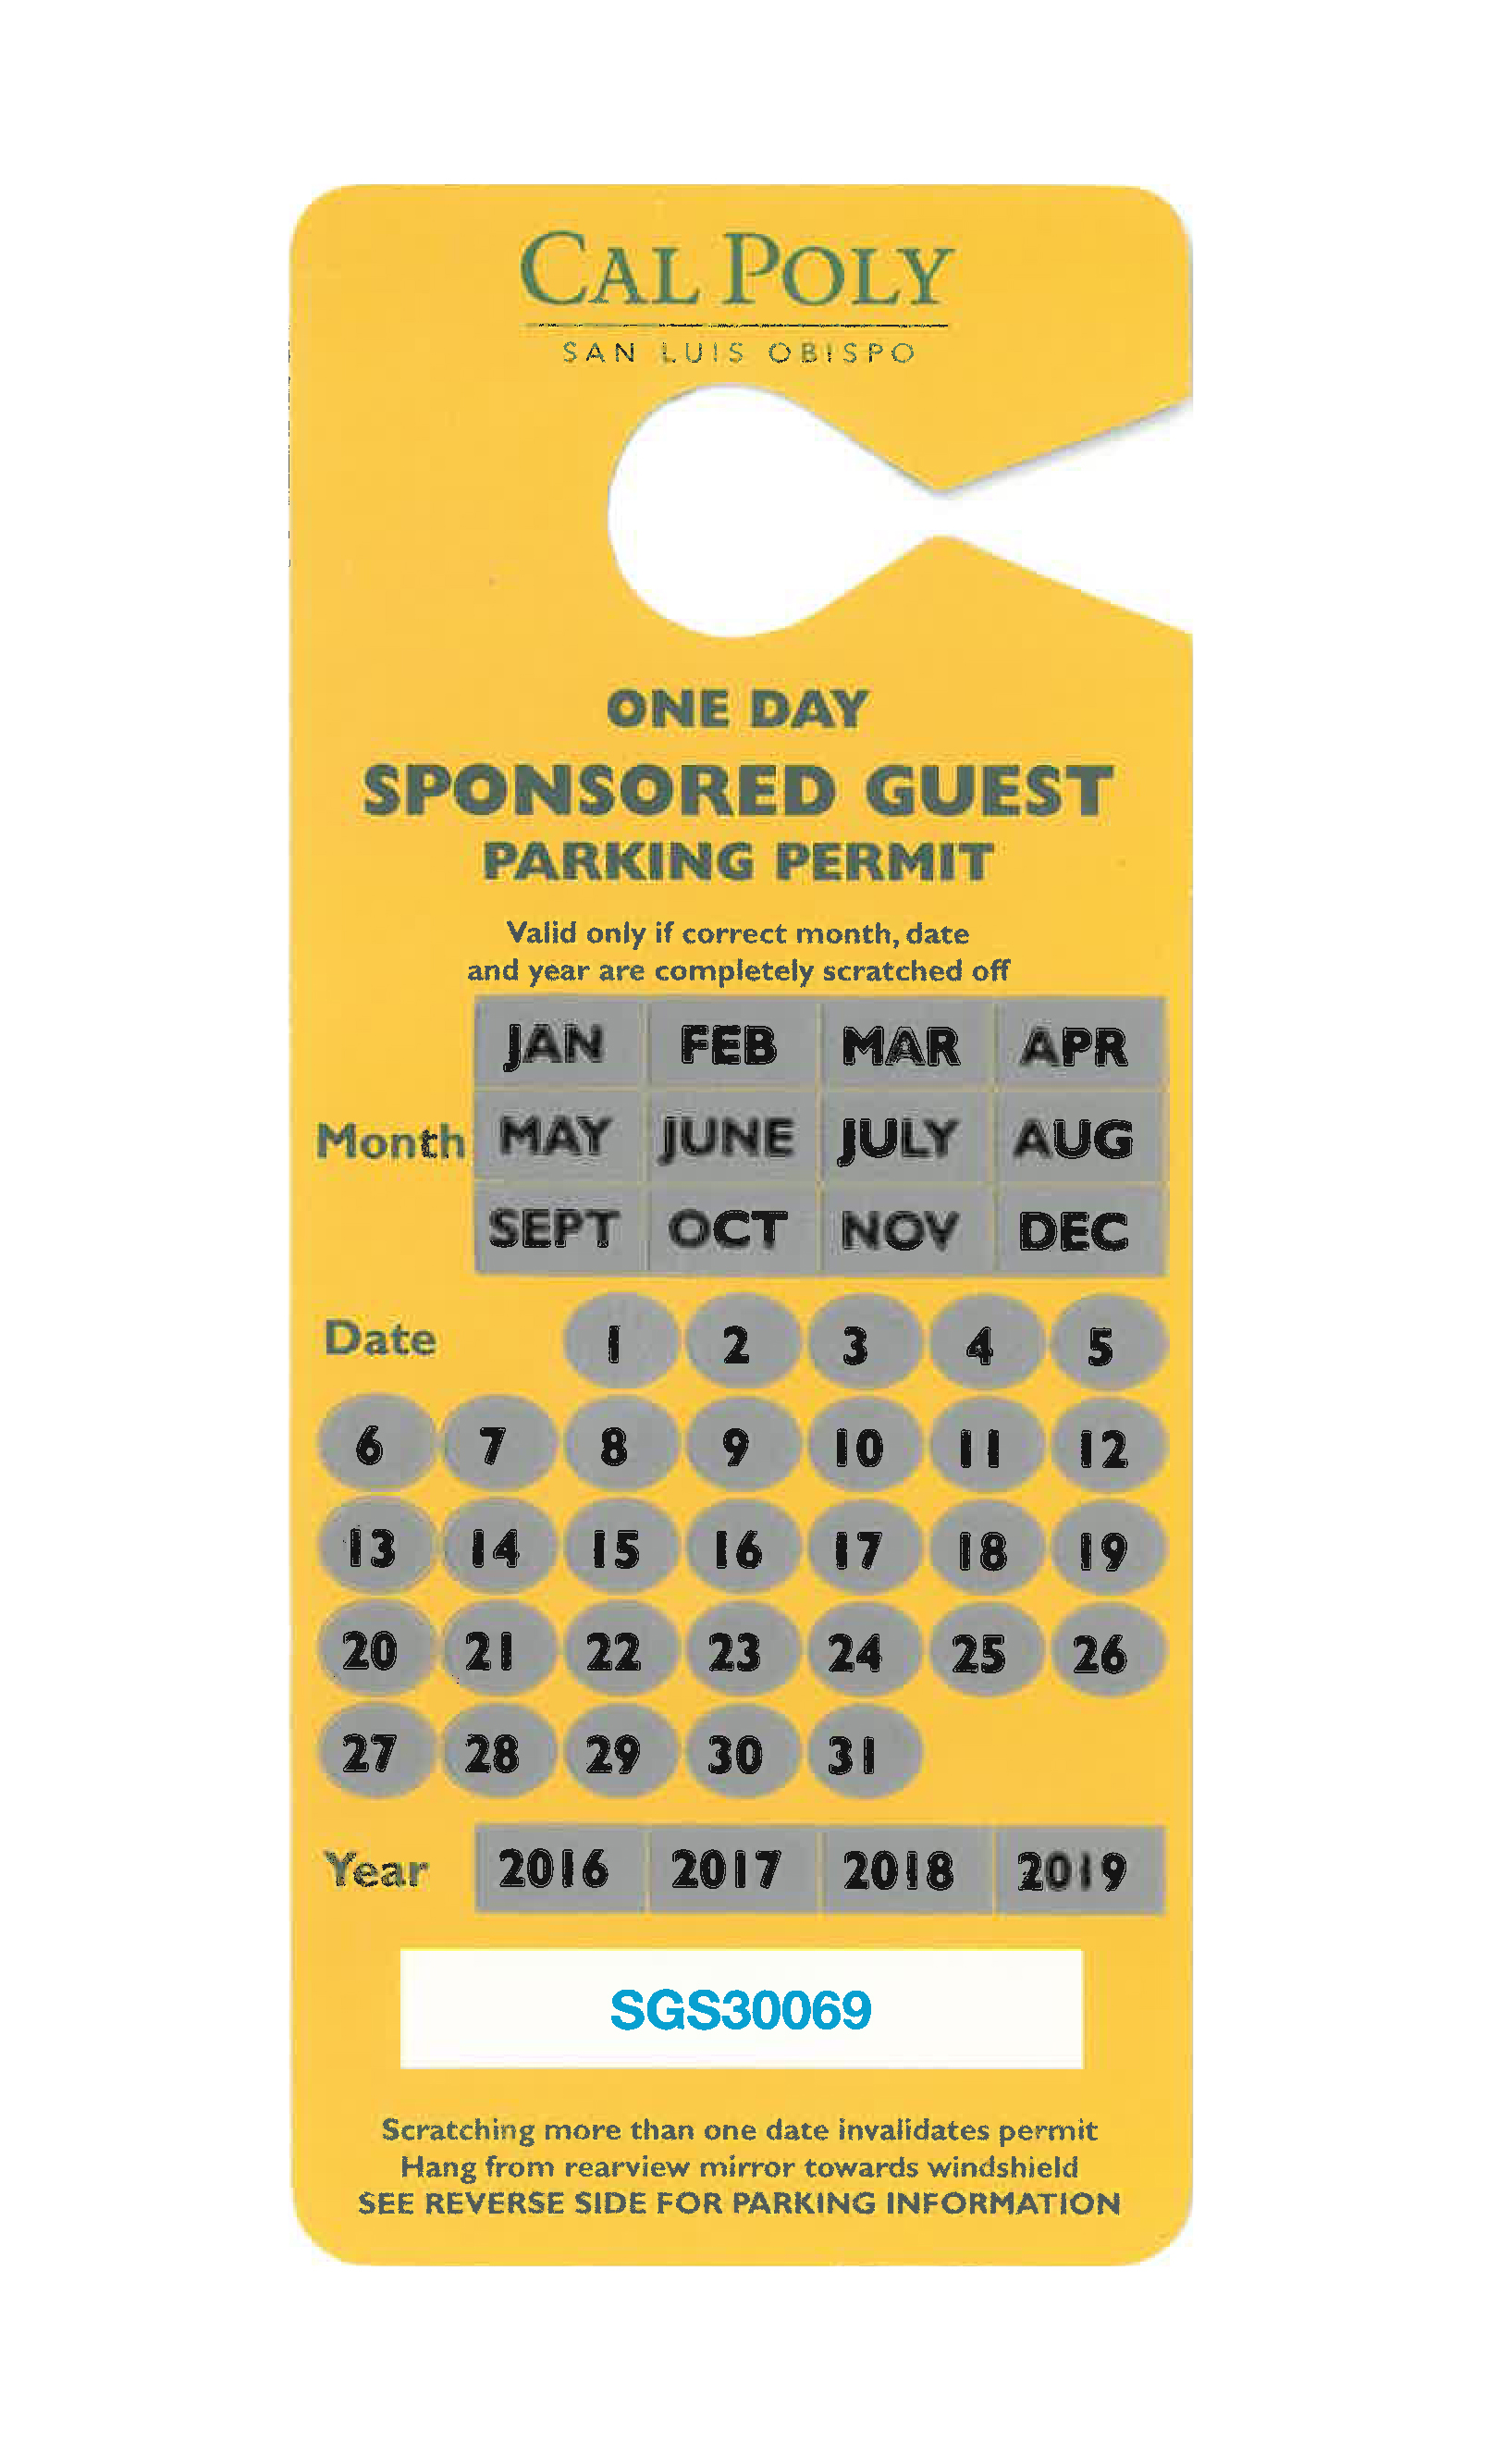 An illustration of a sponsored guest pass.